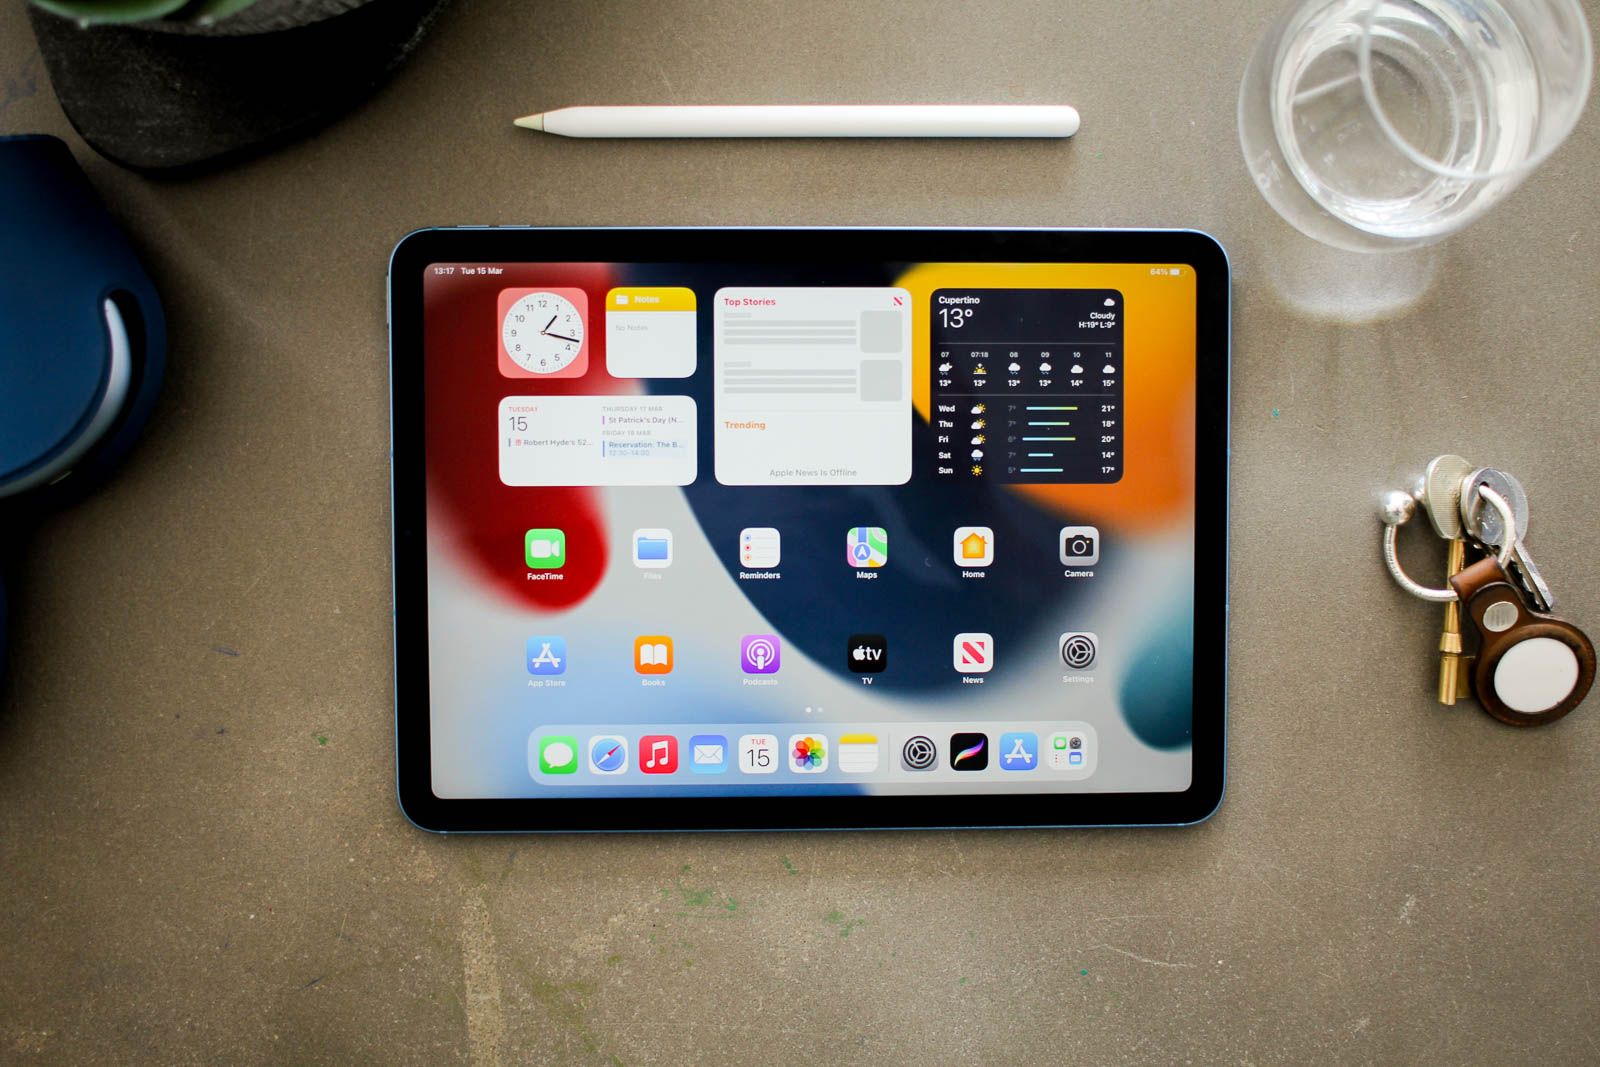 How to connect to Wi-Fi on iPad